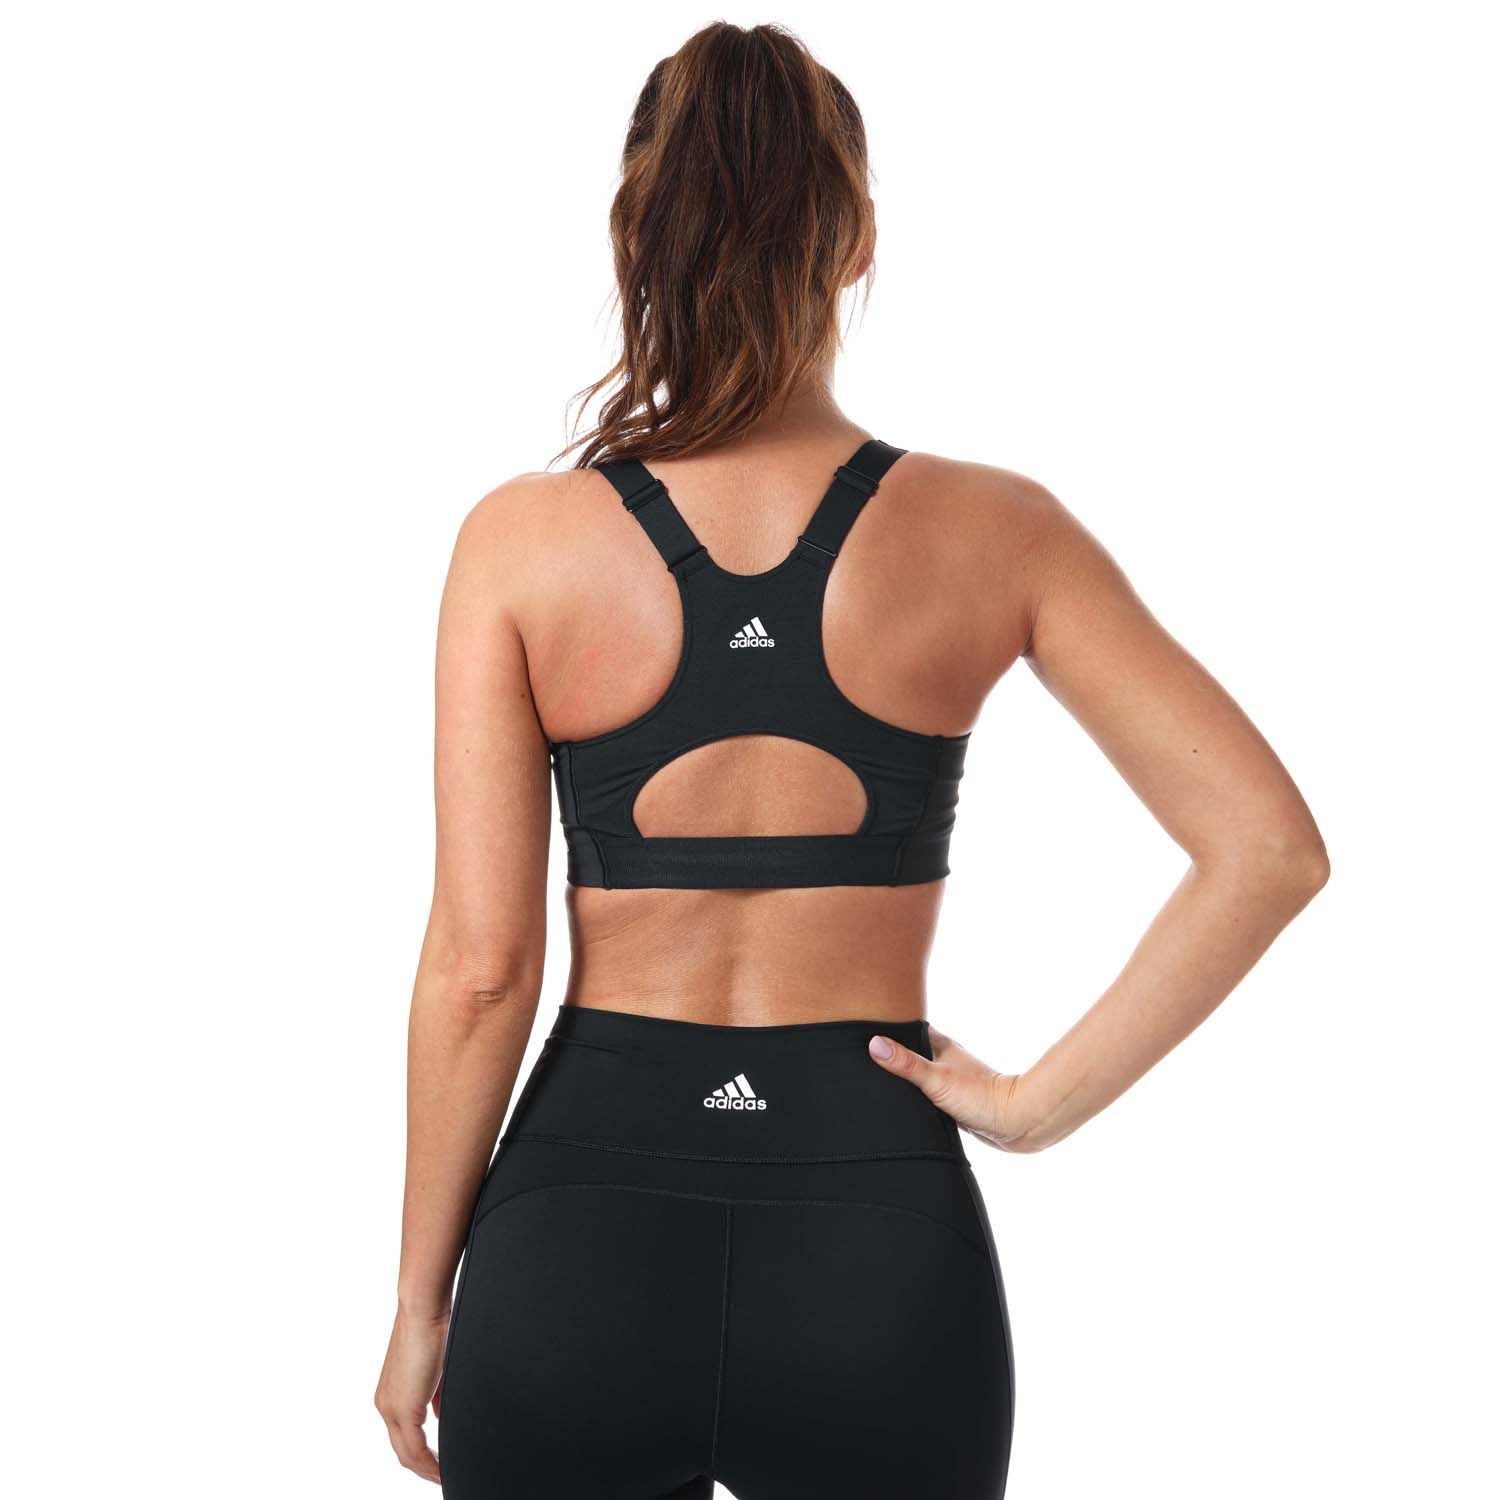 Womens adidas Ultimate High-Support Logo Bra in black - white.- Adjustable straps.- Front strap stabilizers.- Power-mesh overlay.- Built-in foam pads.- Moisture absorbing.- Hook-and-eye closure.- Tight fit with high support.- Shell: 79% Polyester (Recycled)  21% Elastane. Mesh Part: 82% Polyester (Recycled)  18% Elastane.- Ref: GR8205